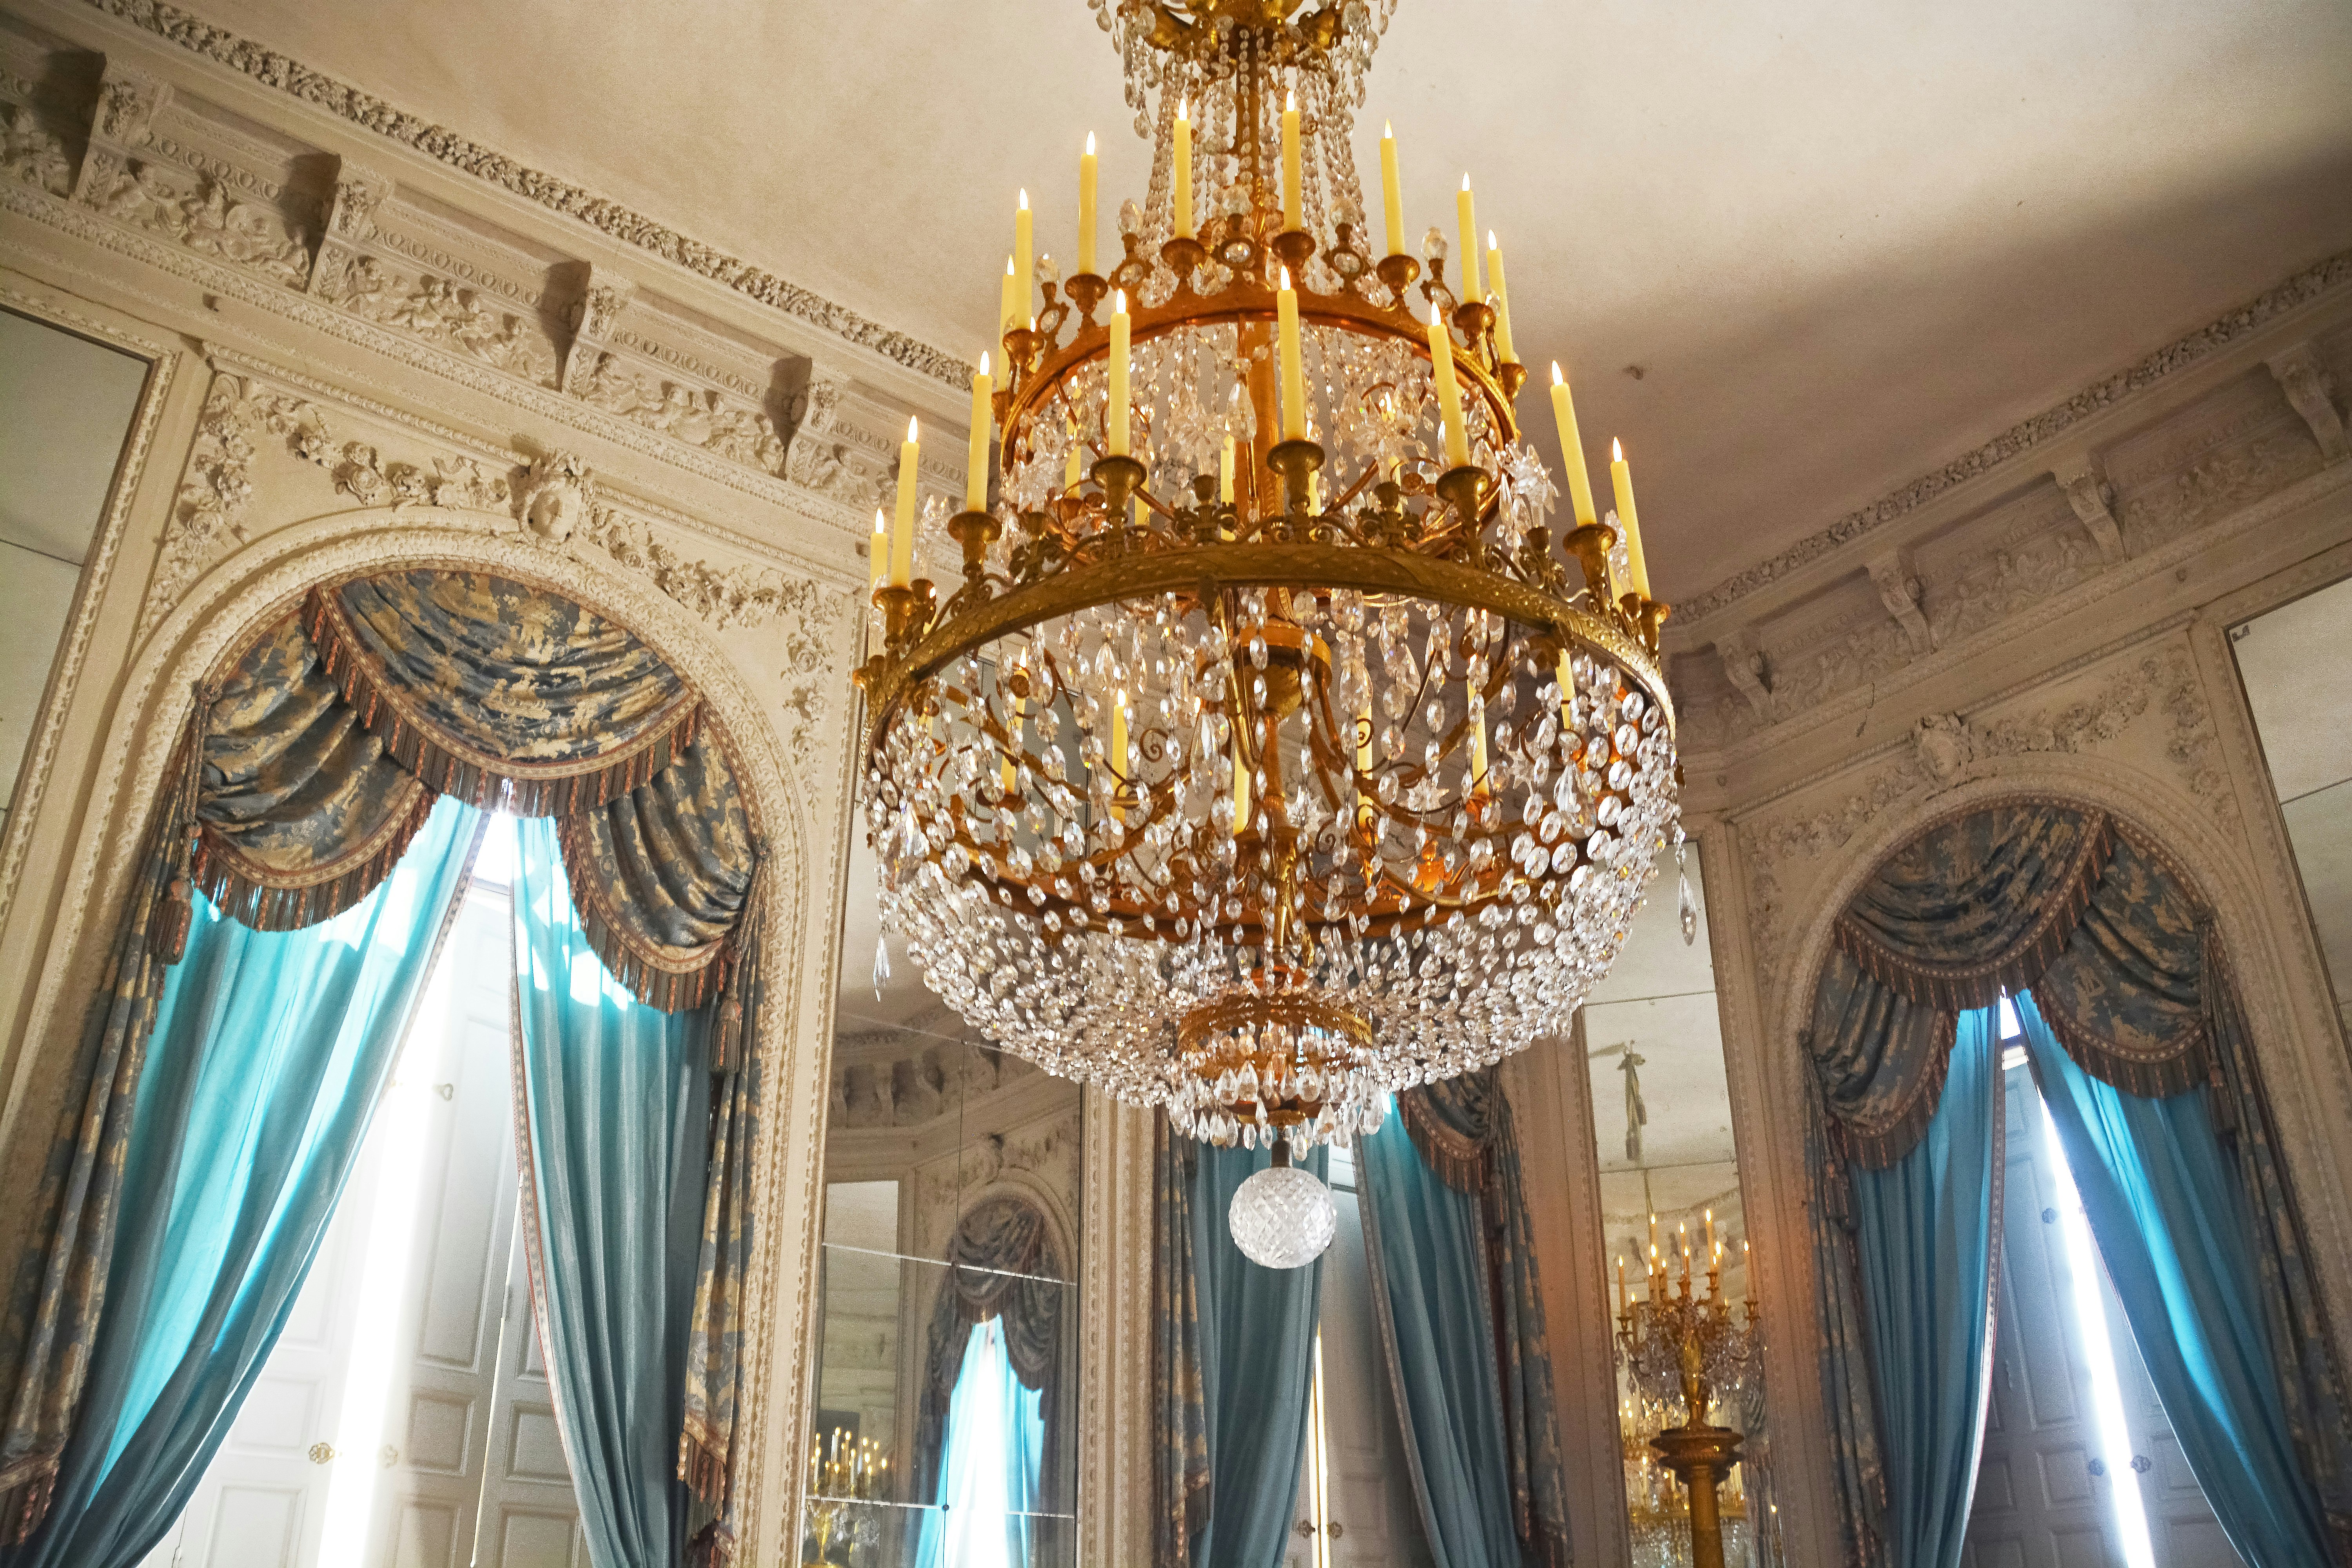 gold and white chandelier turned on inside room